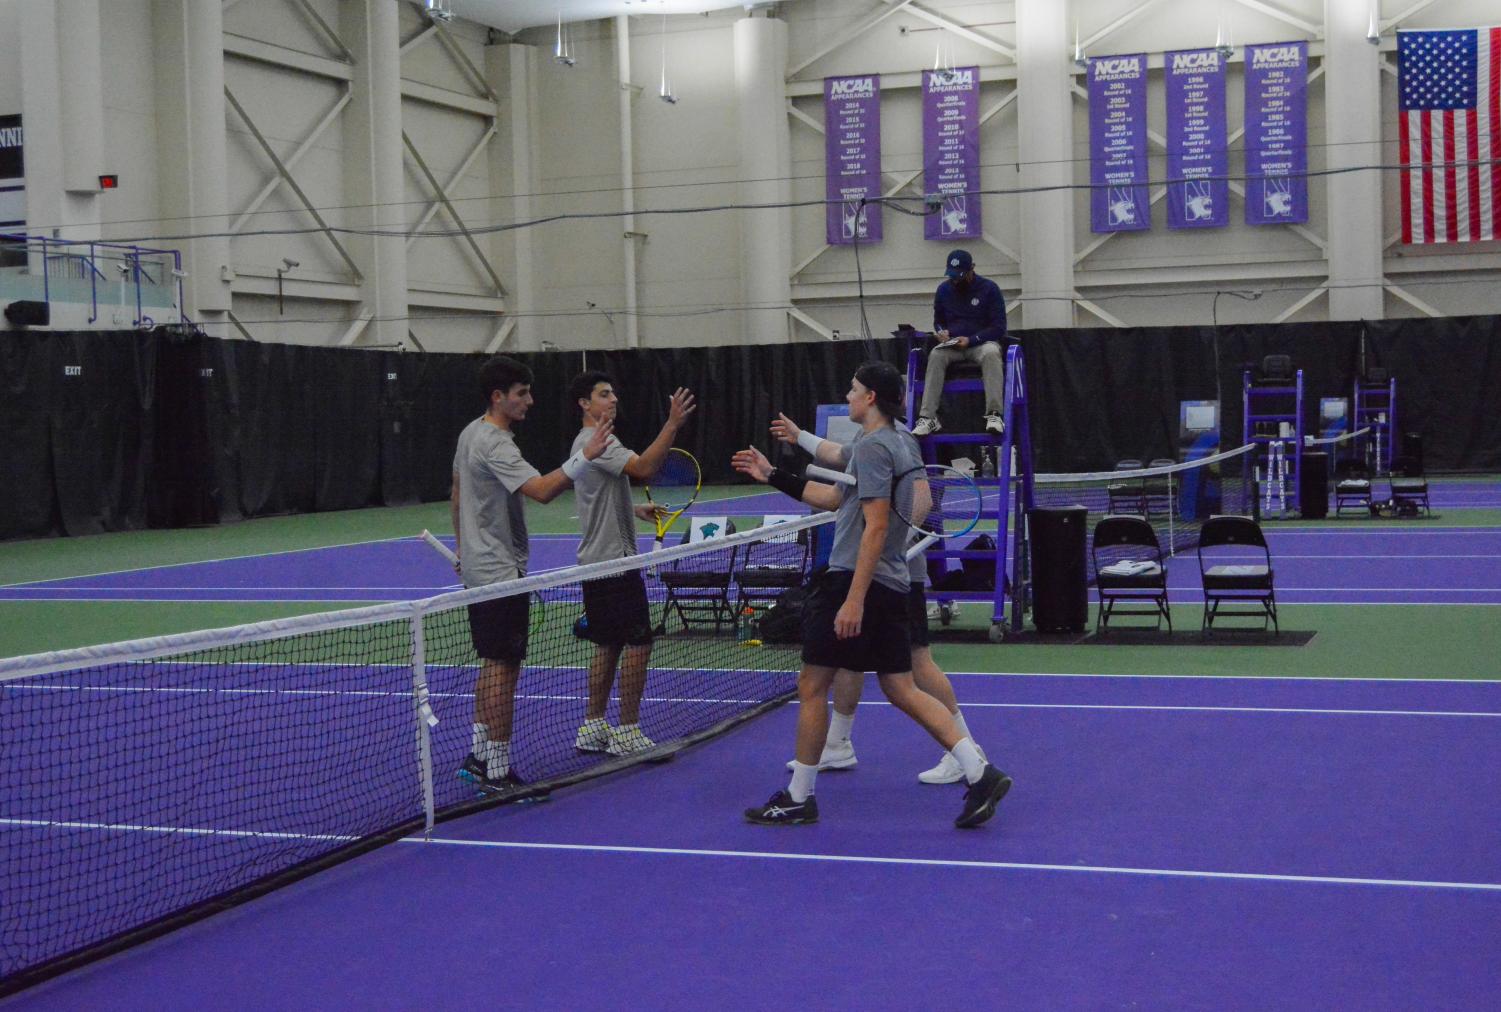 Two+tennis+players+in+gray+shirts+and+black+shorts+shake+hands+with+opponents+at+the+net.